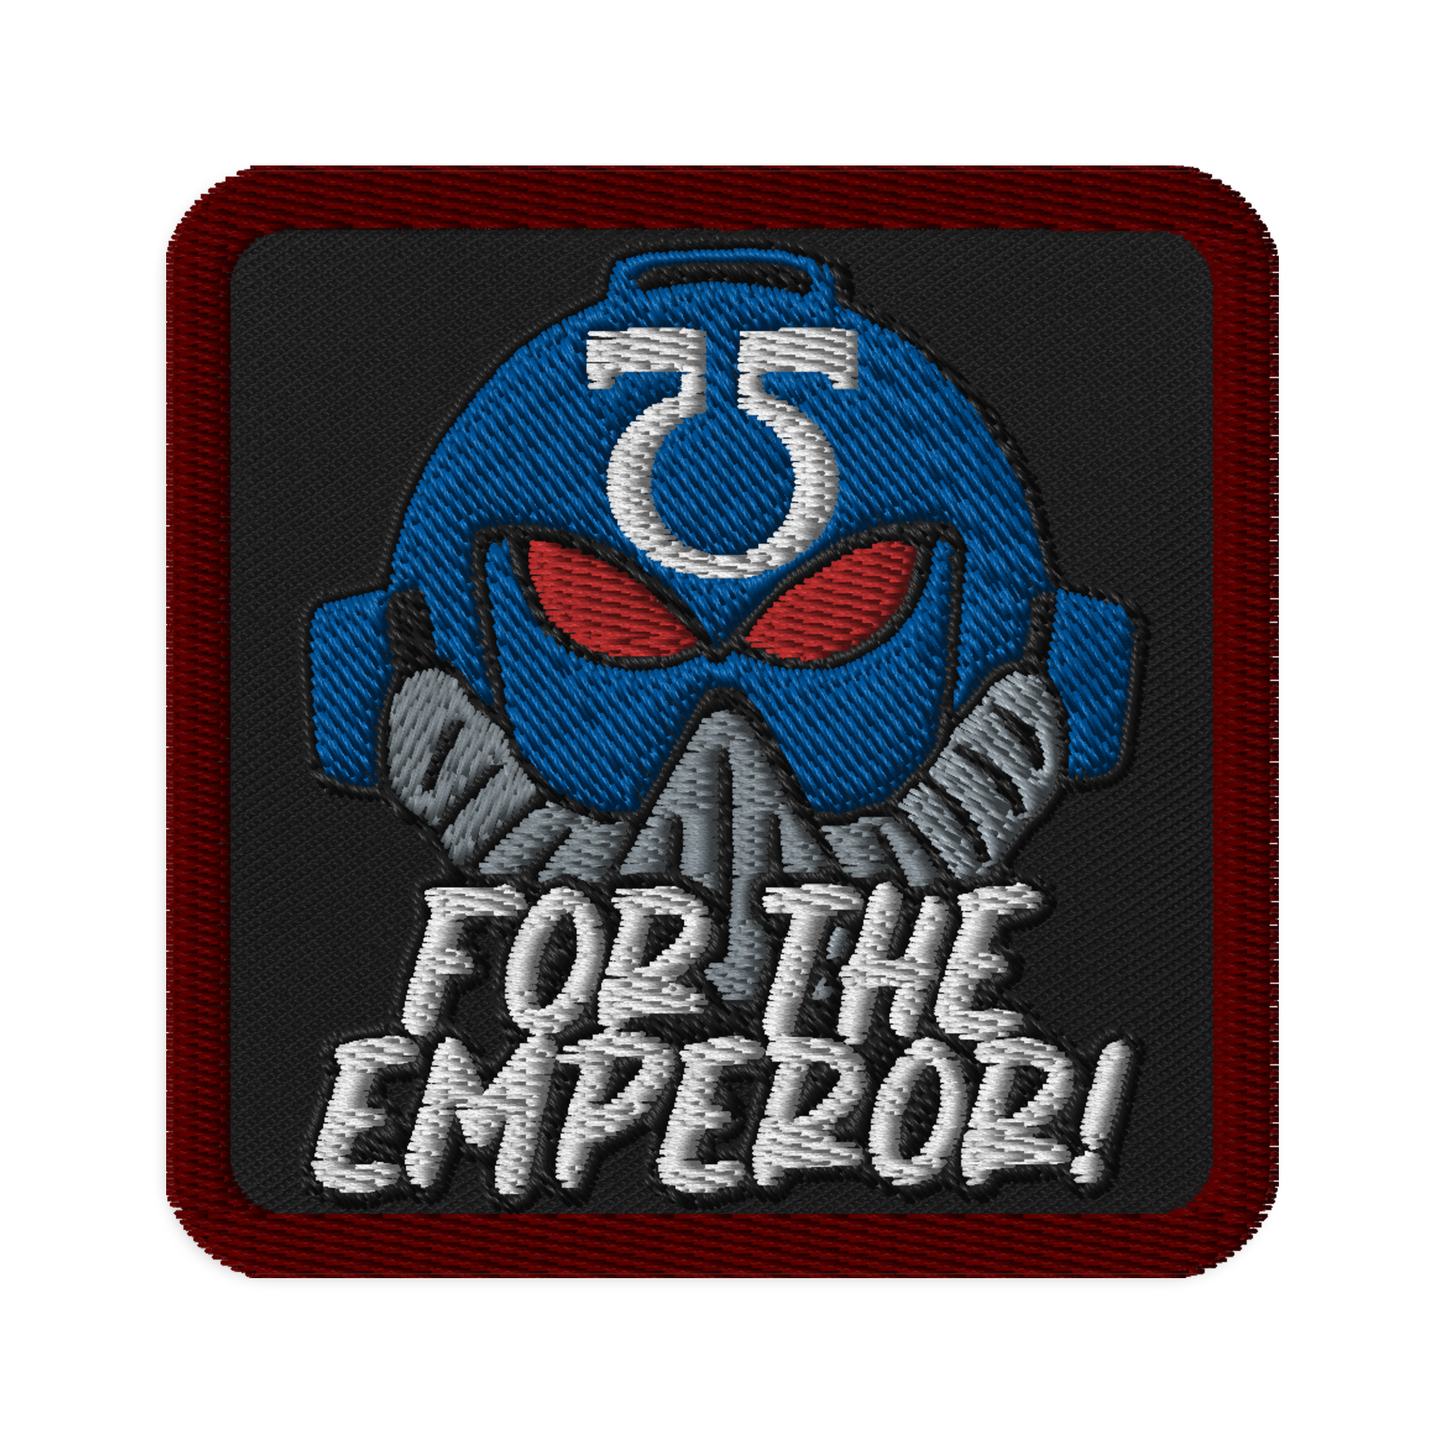 Meme Patches: For the Emperor!